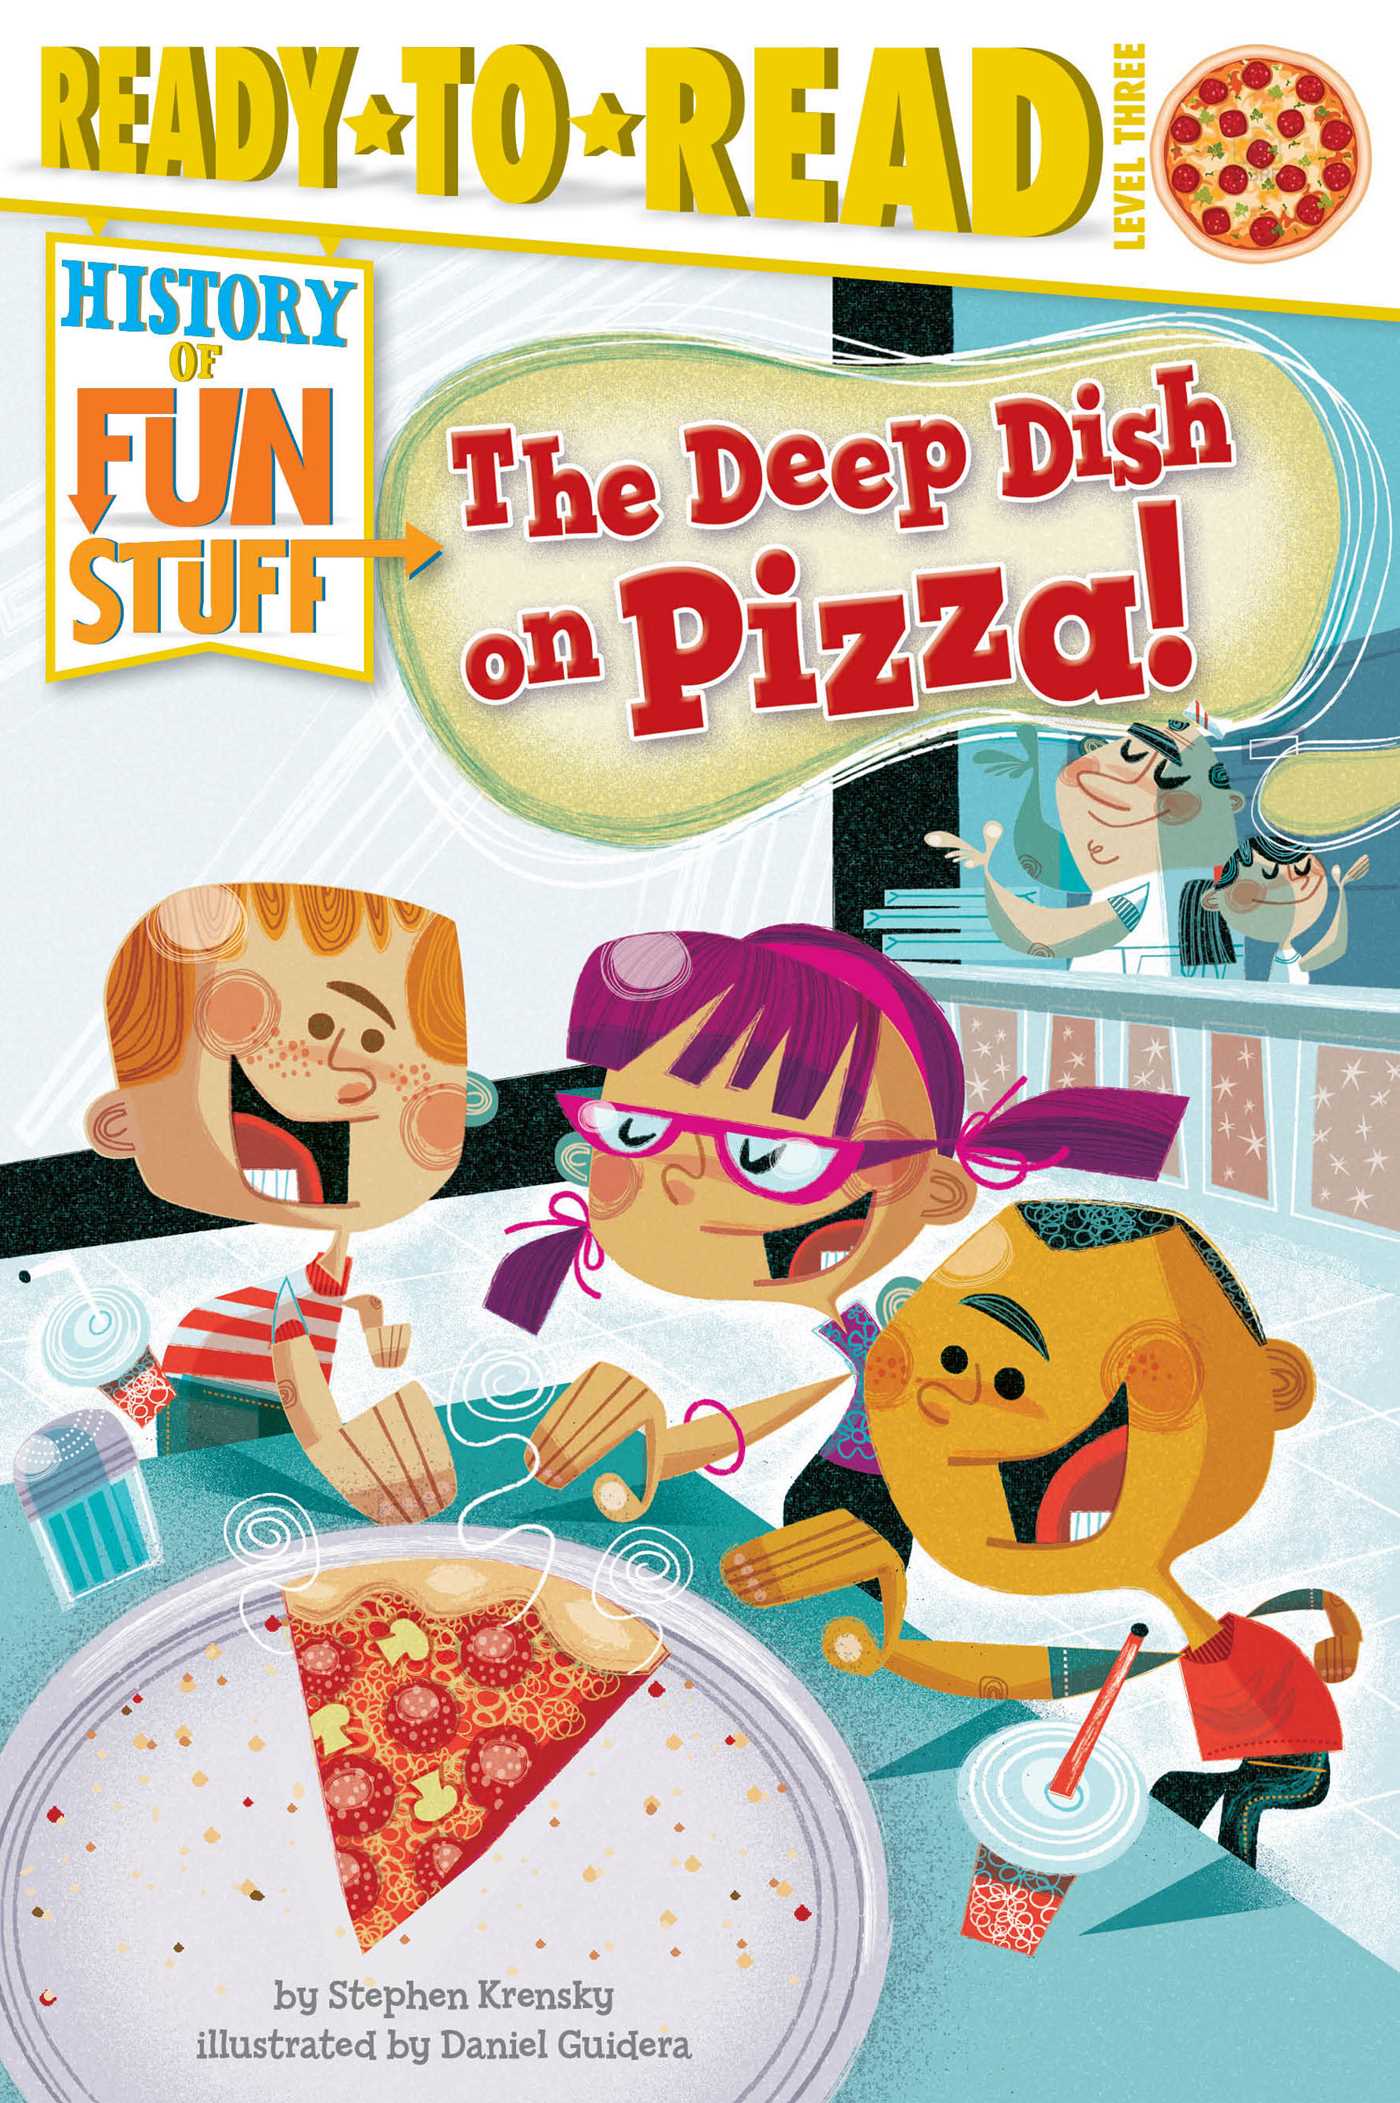 The deep dish on pizza!